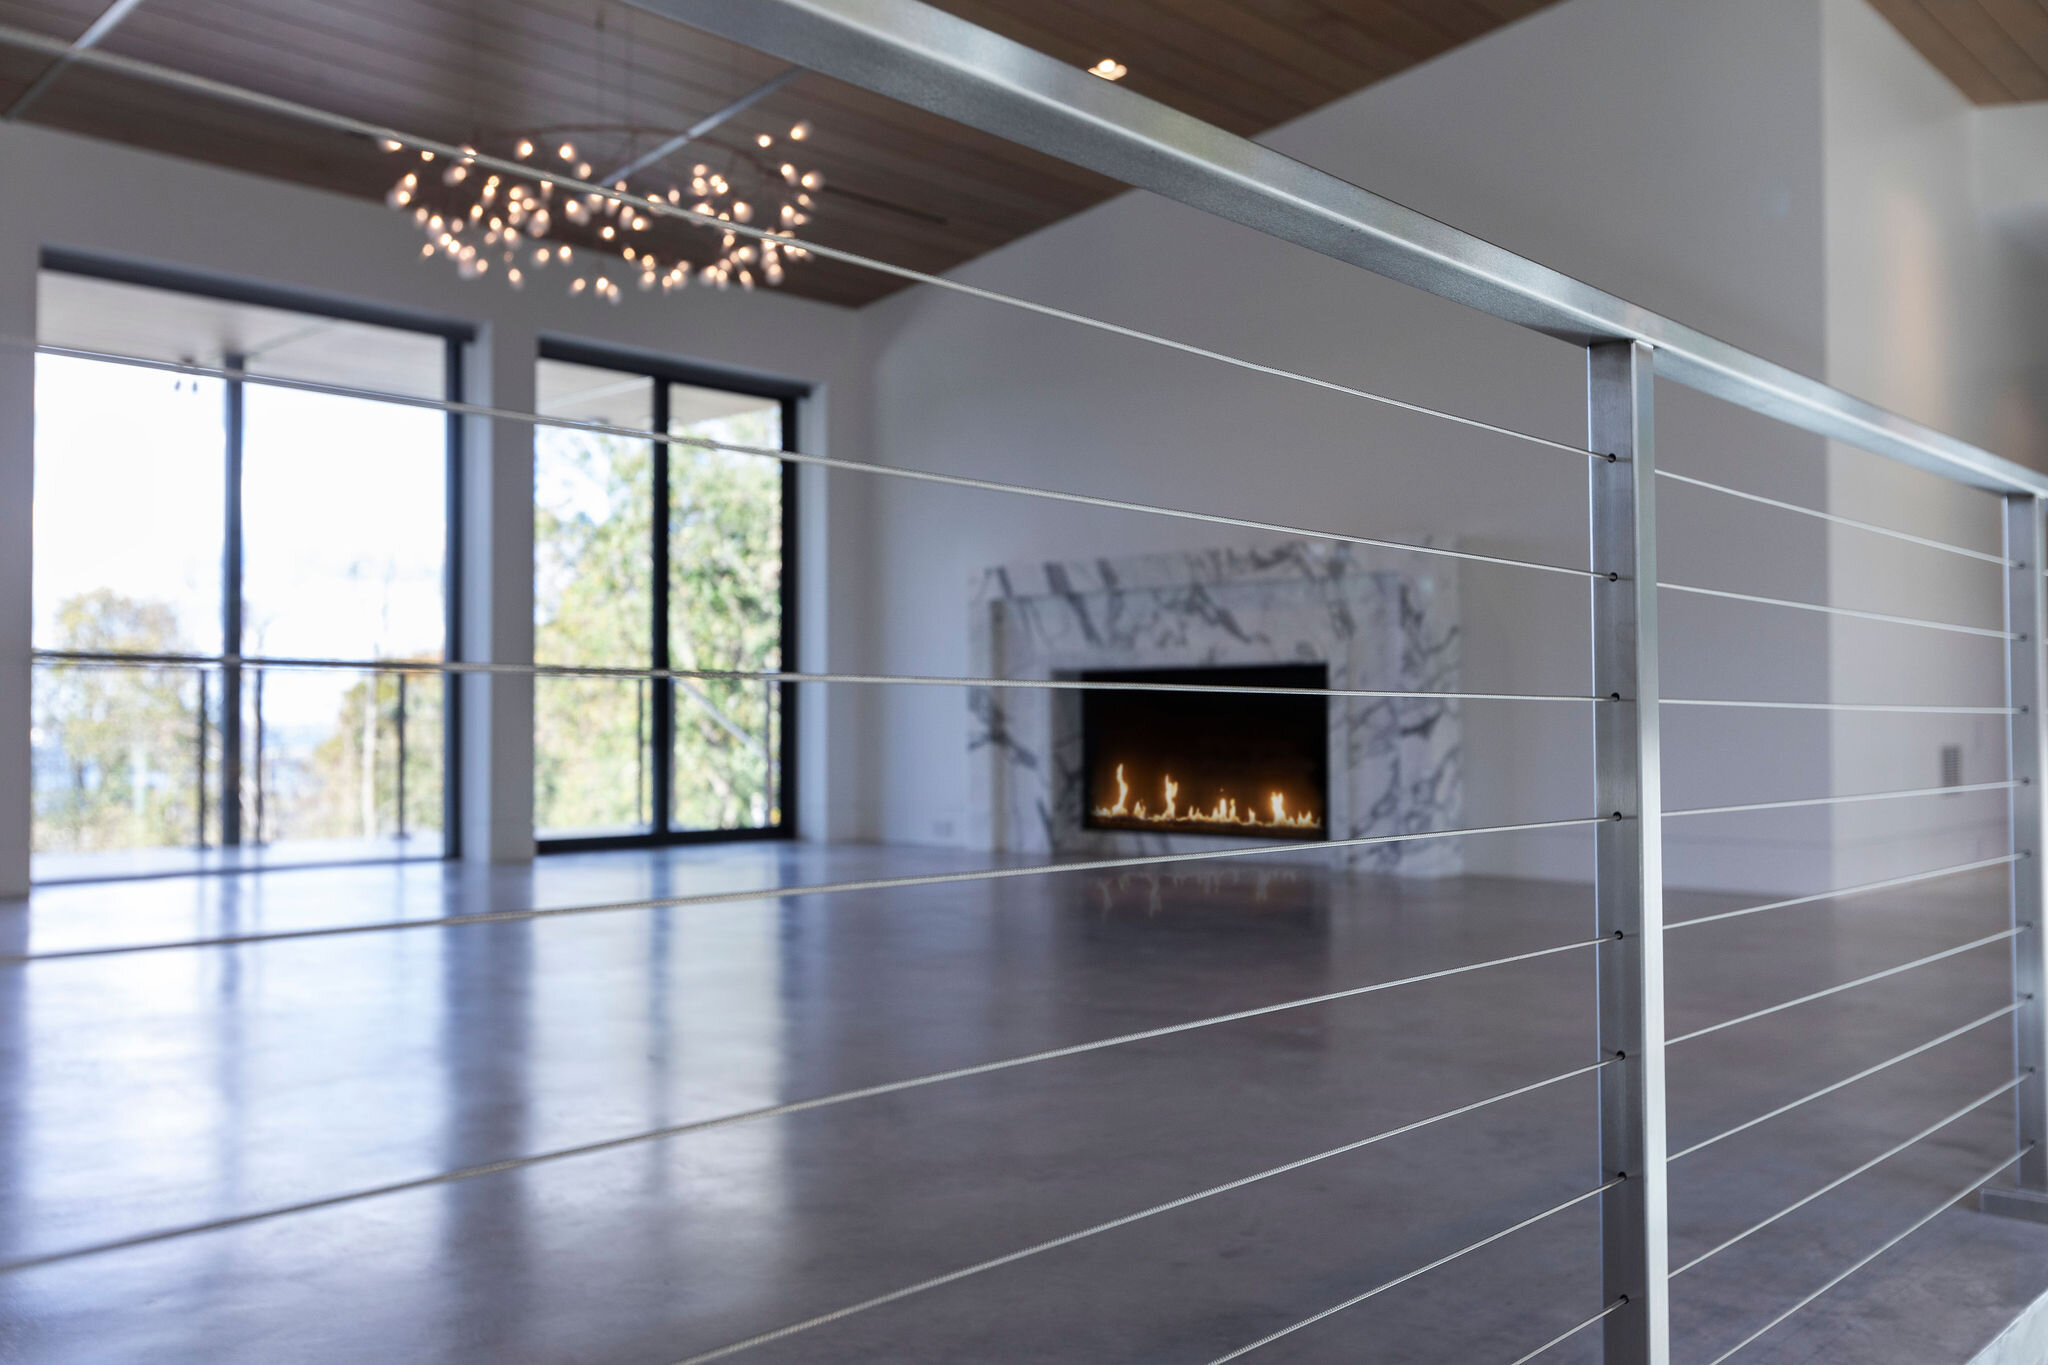  Poured concrete floors with a blazing fire welcome you into the new living room. We designed this home with a Zen sensibility marrying the inside with the outdoors. 